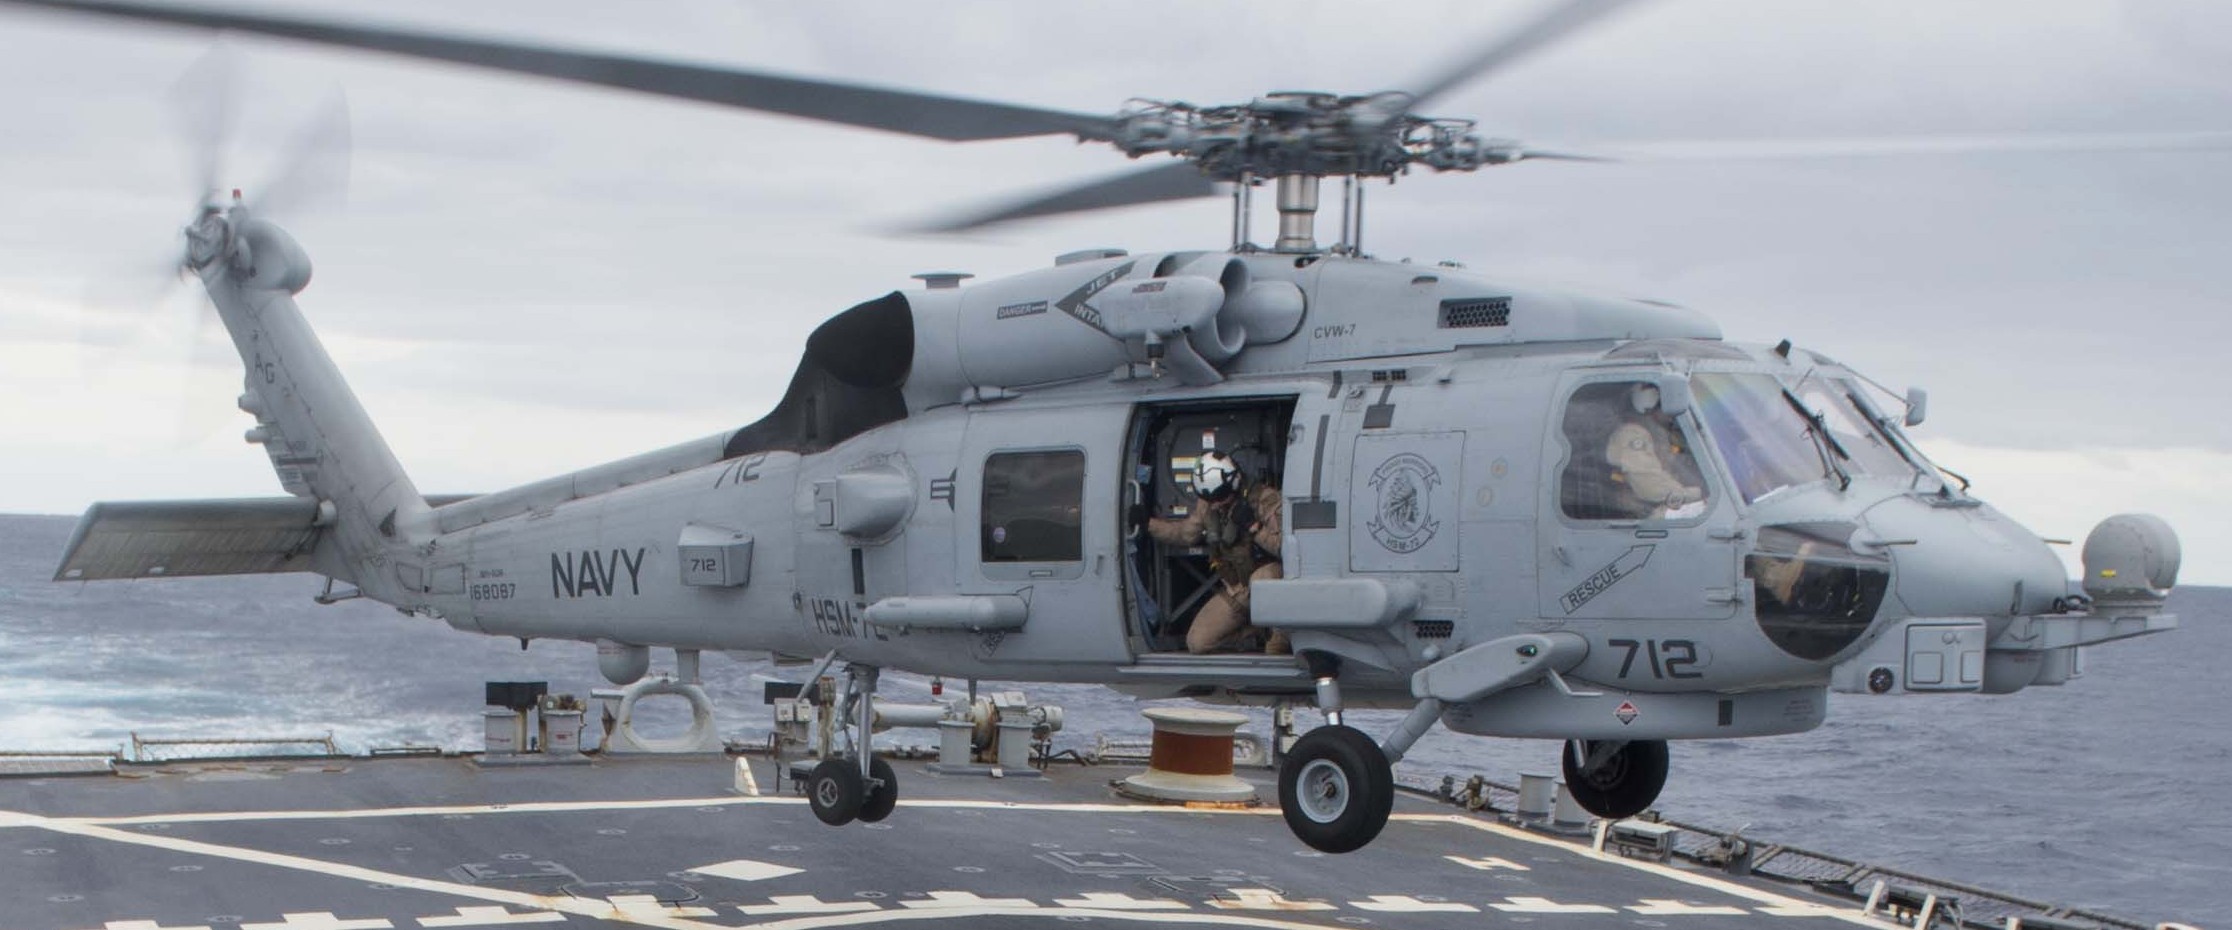 hsm-72 proud warriors helicopter maritime strike squadron us navy mh-60r seahawk 2015 38 cvw-7